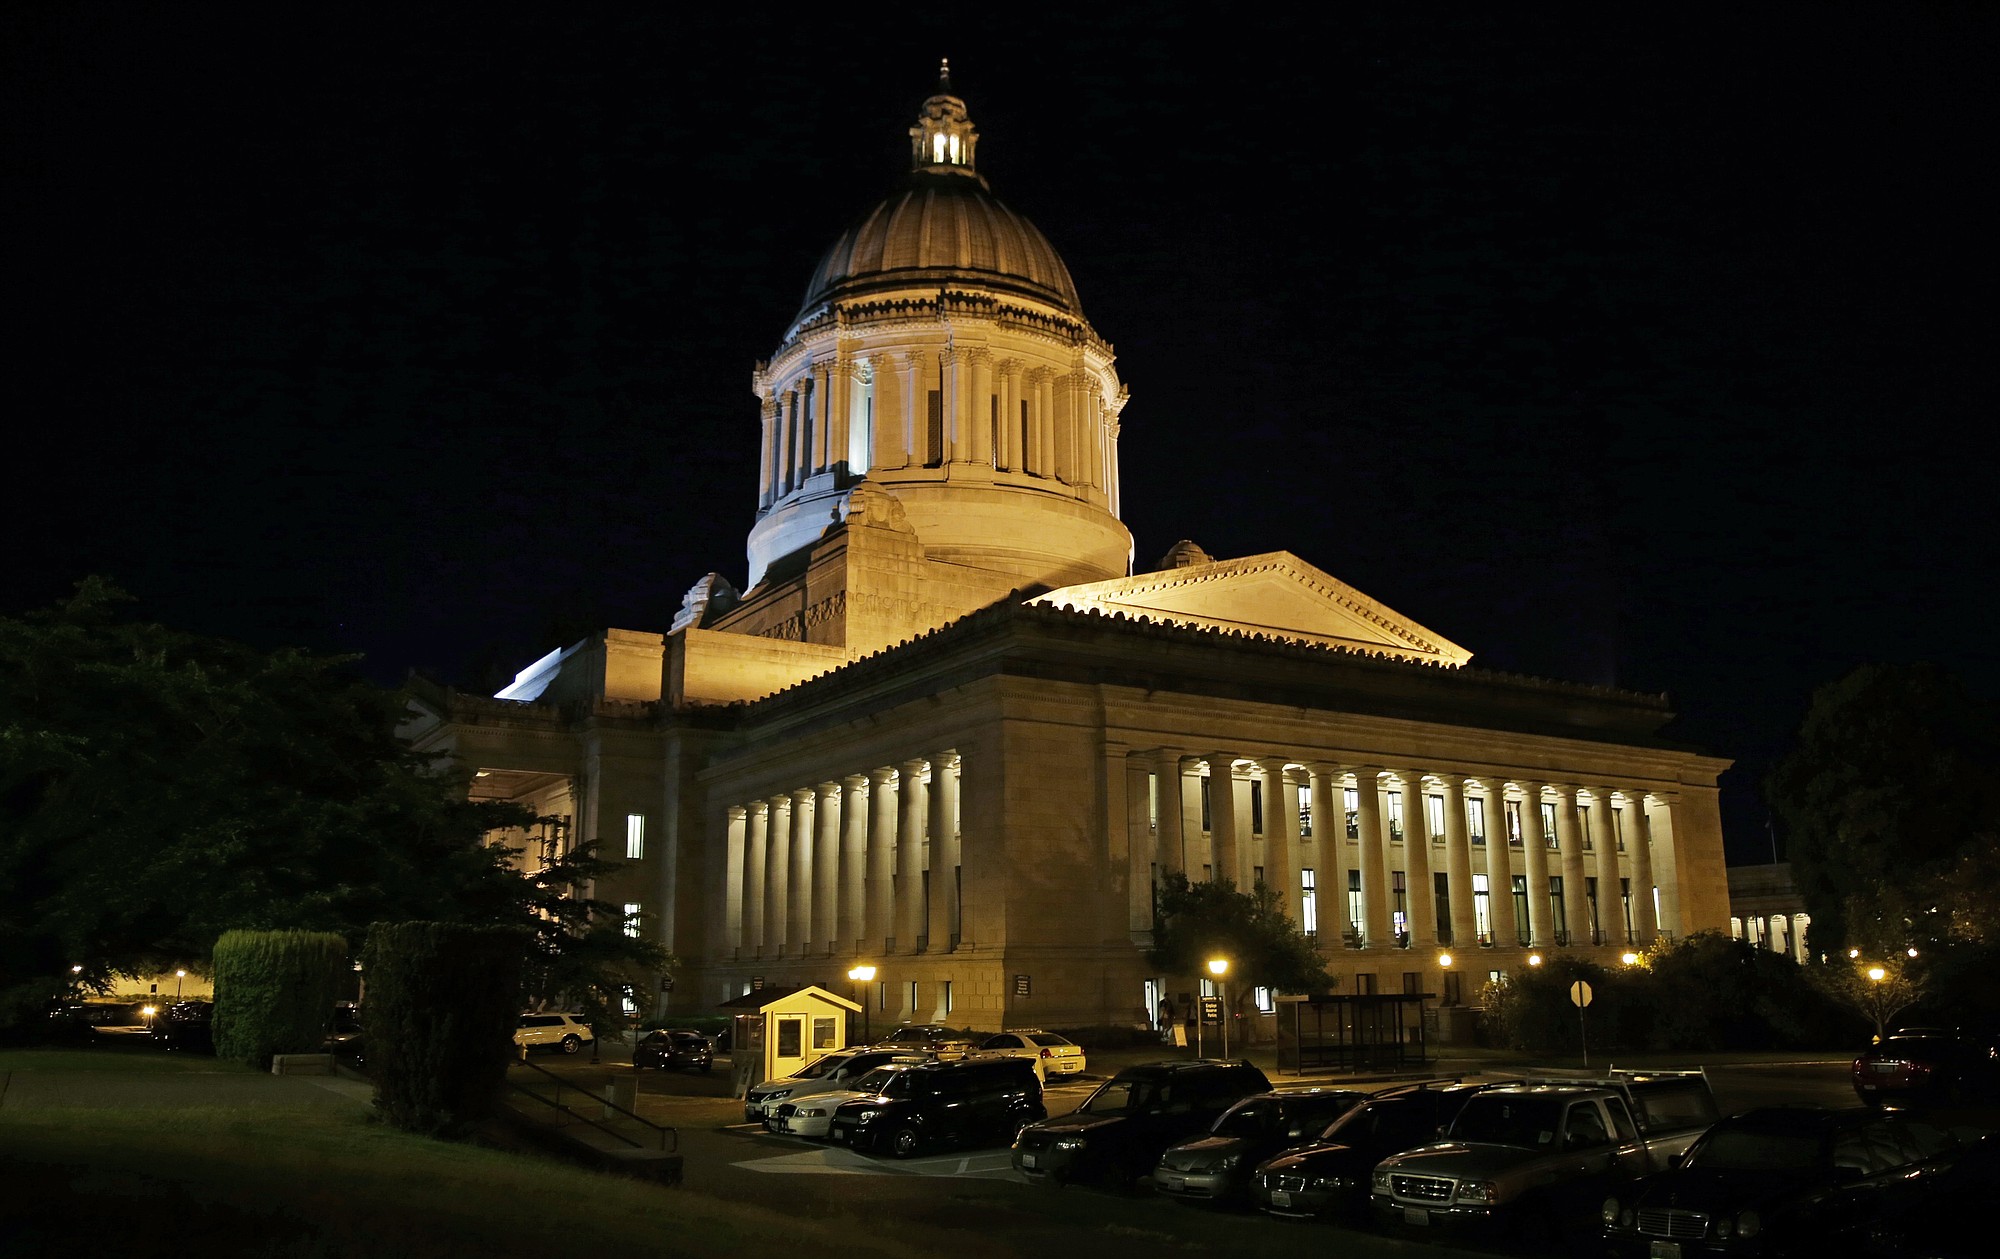 Vehicles remain parked outside the Legislative Building just after midnight July 1 at the Capitol in Olympia.